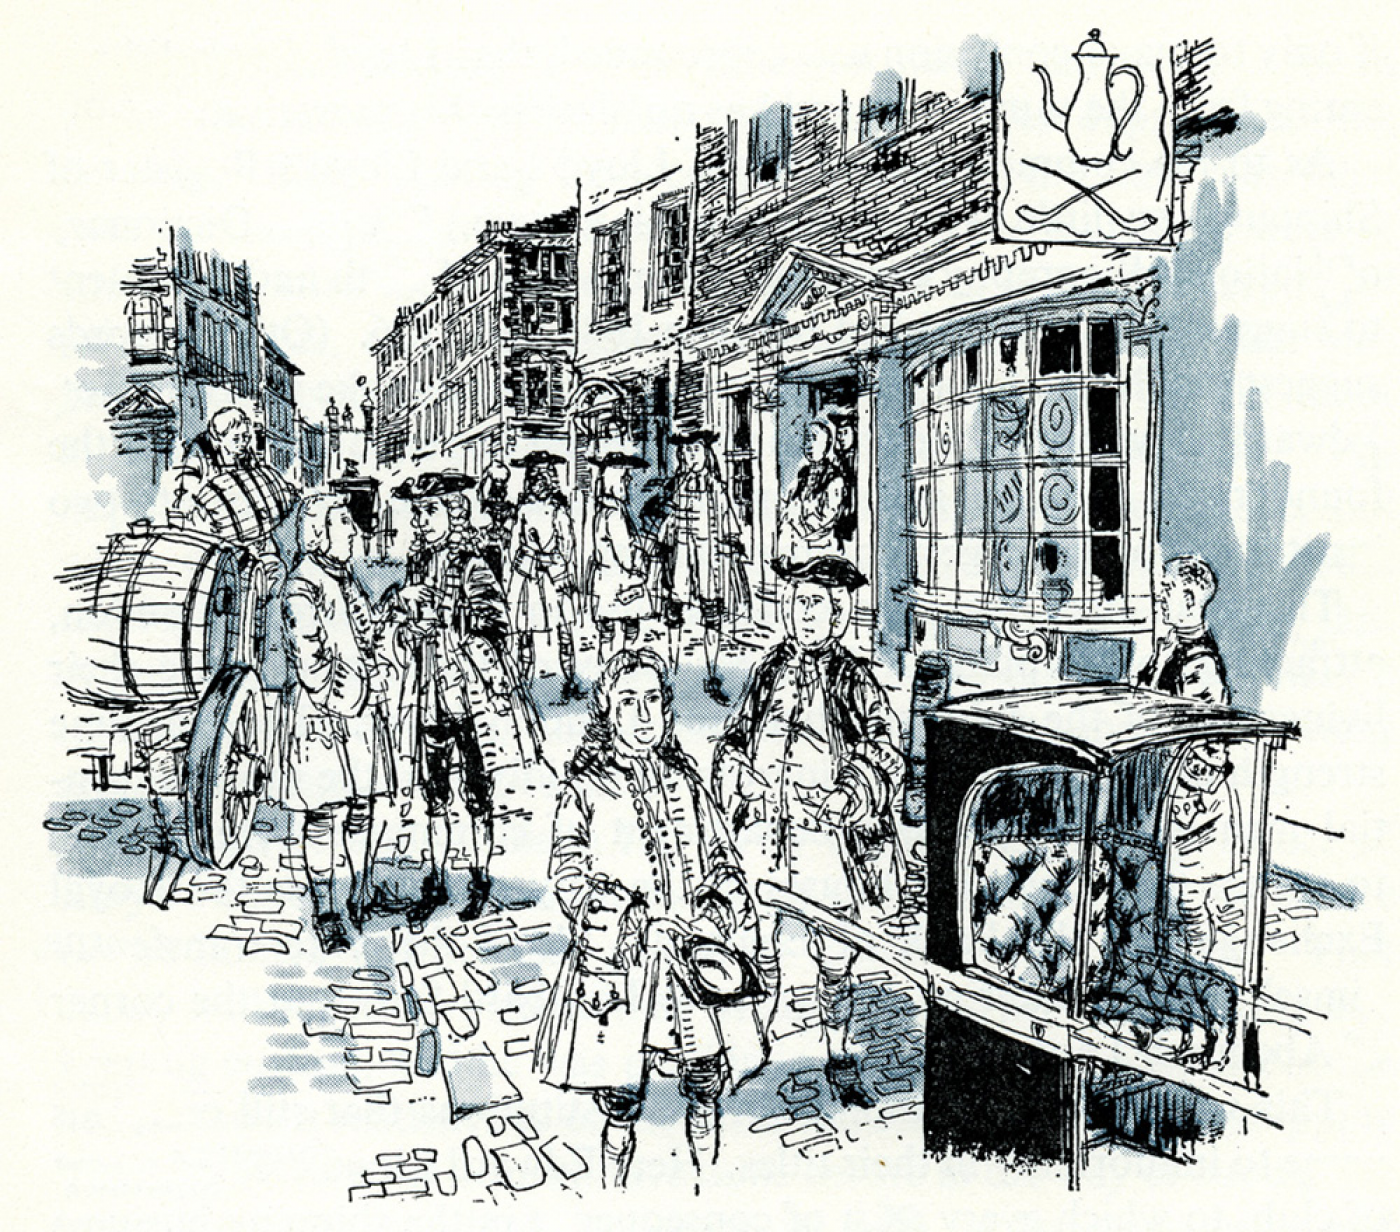 An artistic representation of the Lloyd's Coffee House in the 18th century